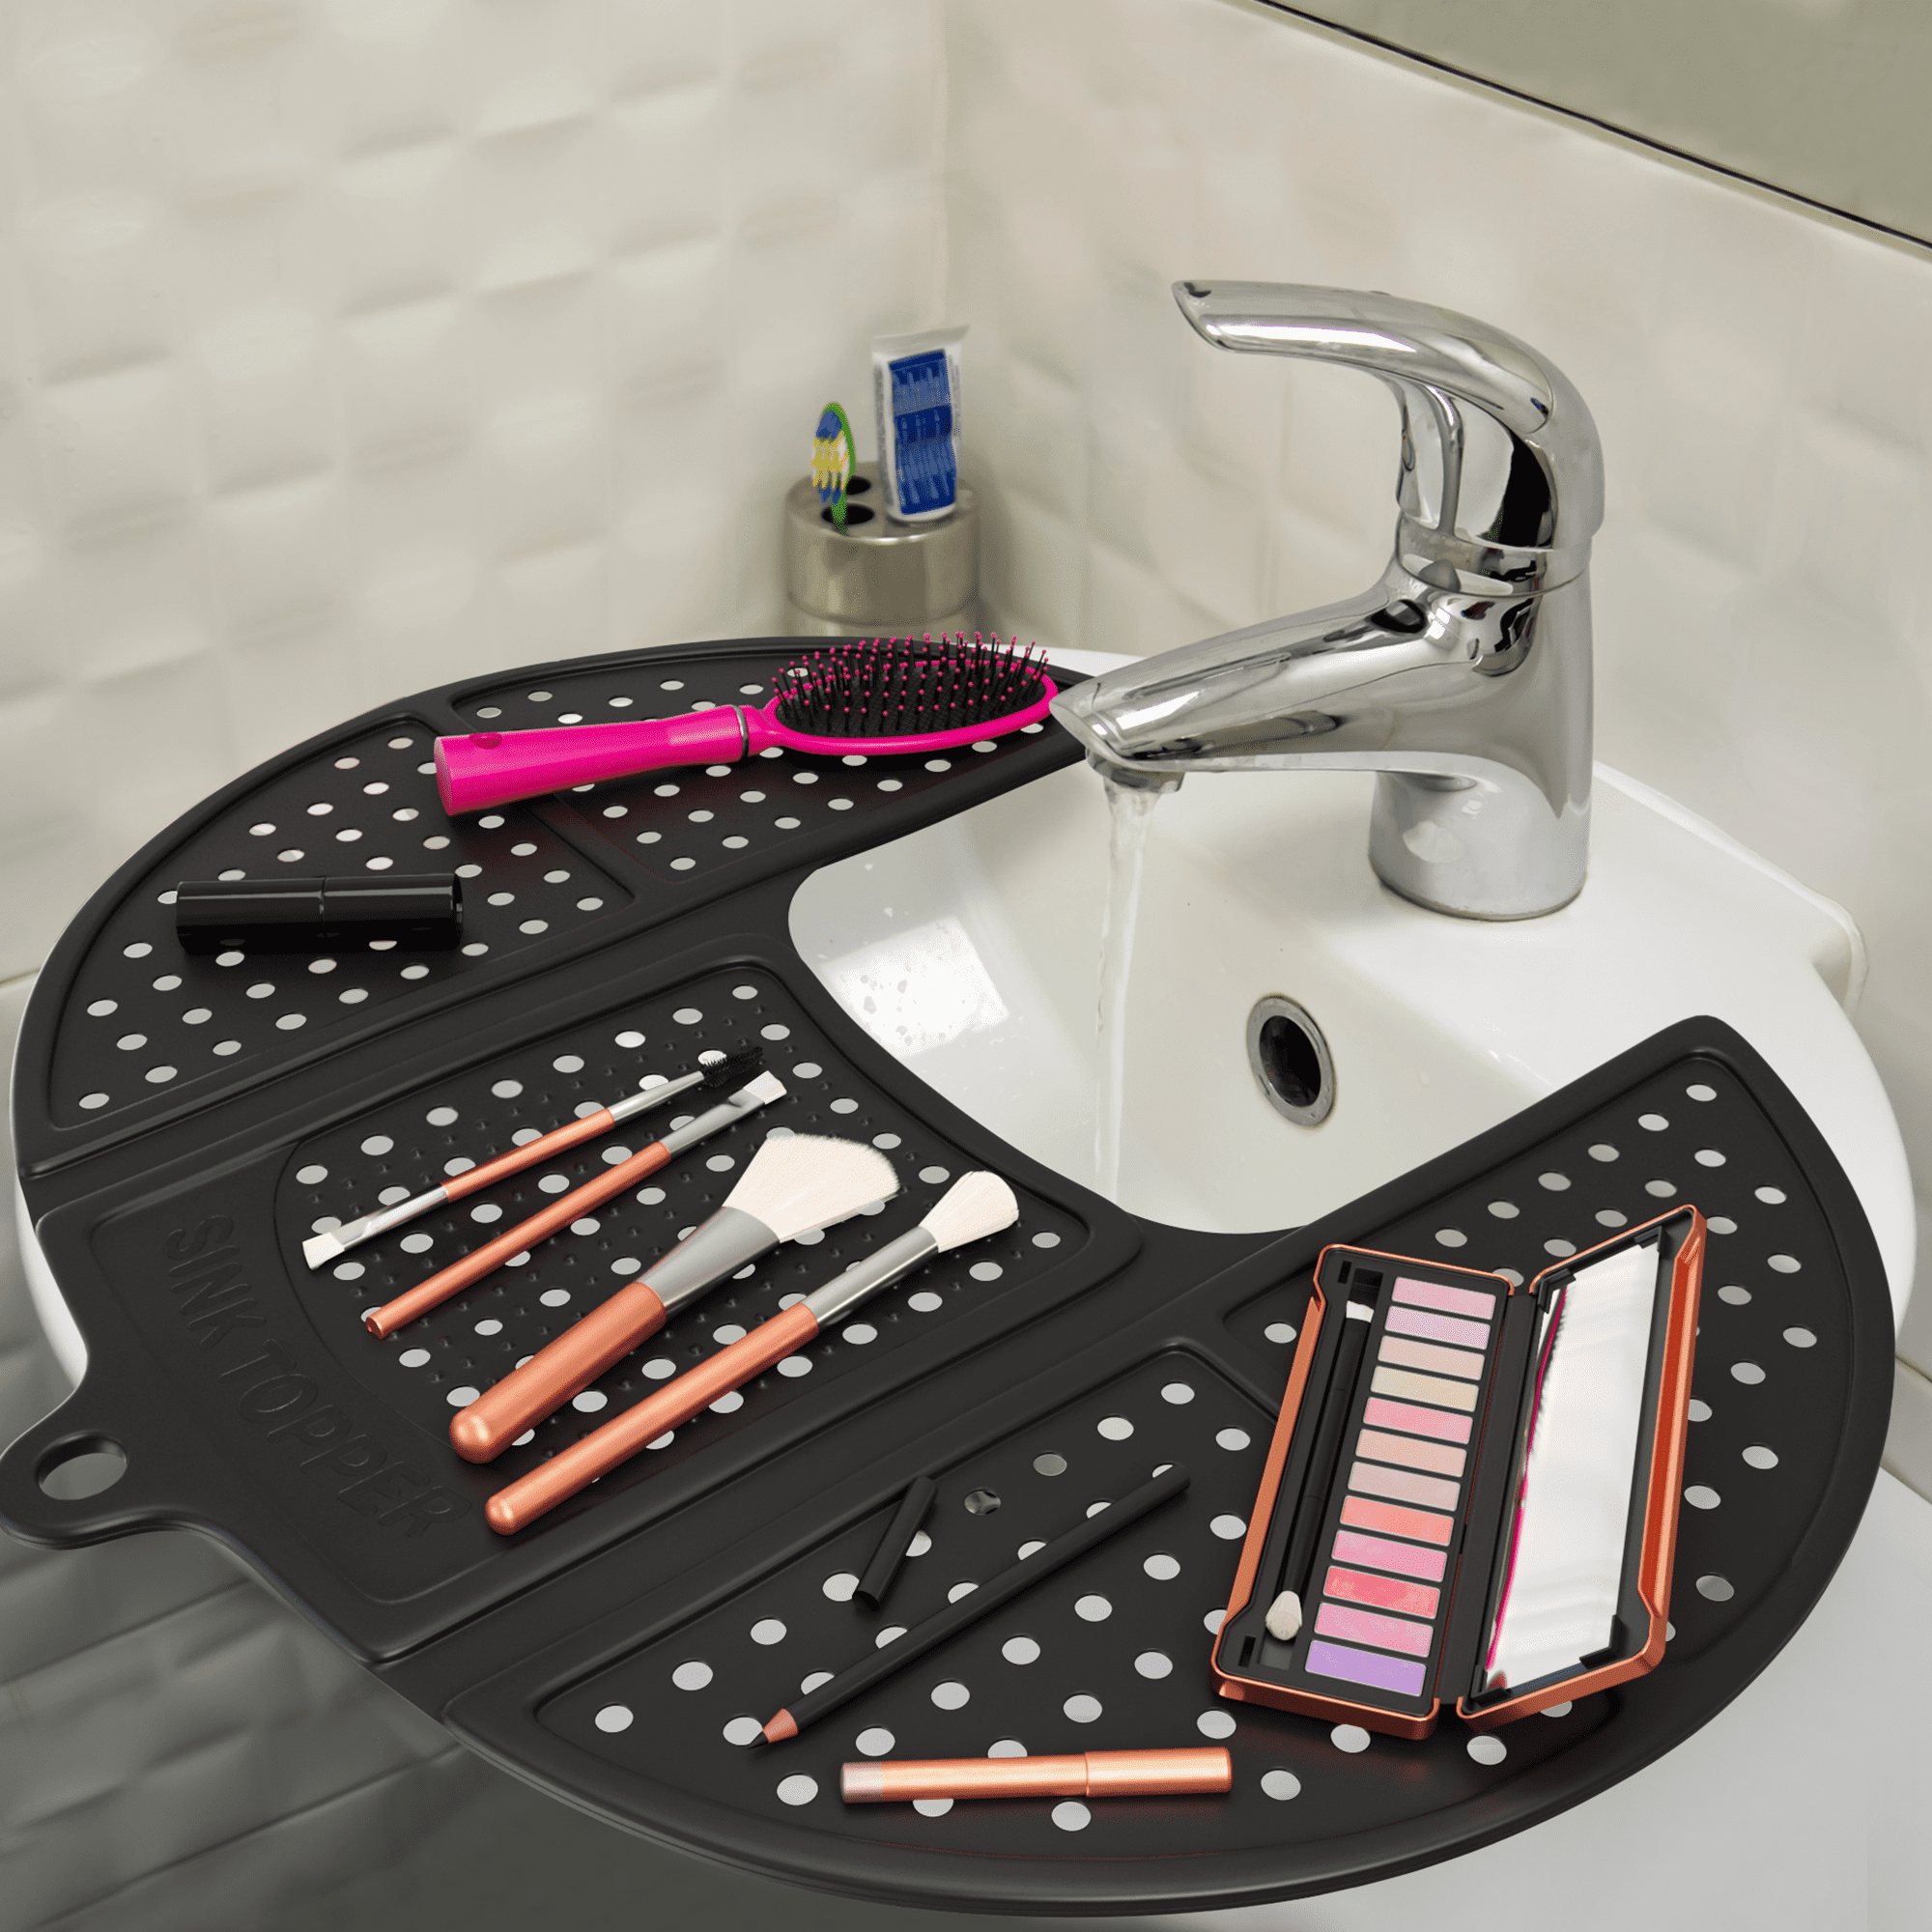 The Matte - Make Up Organizer Space Saver turns Bathroom Sink into a Beauty  Counter in an Instant (Standard, Black)